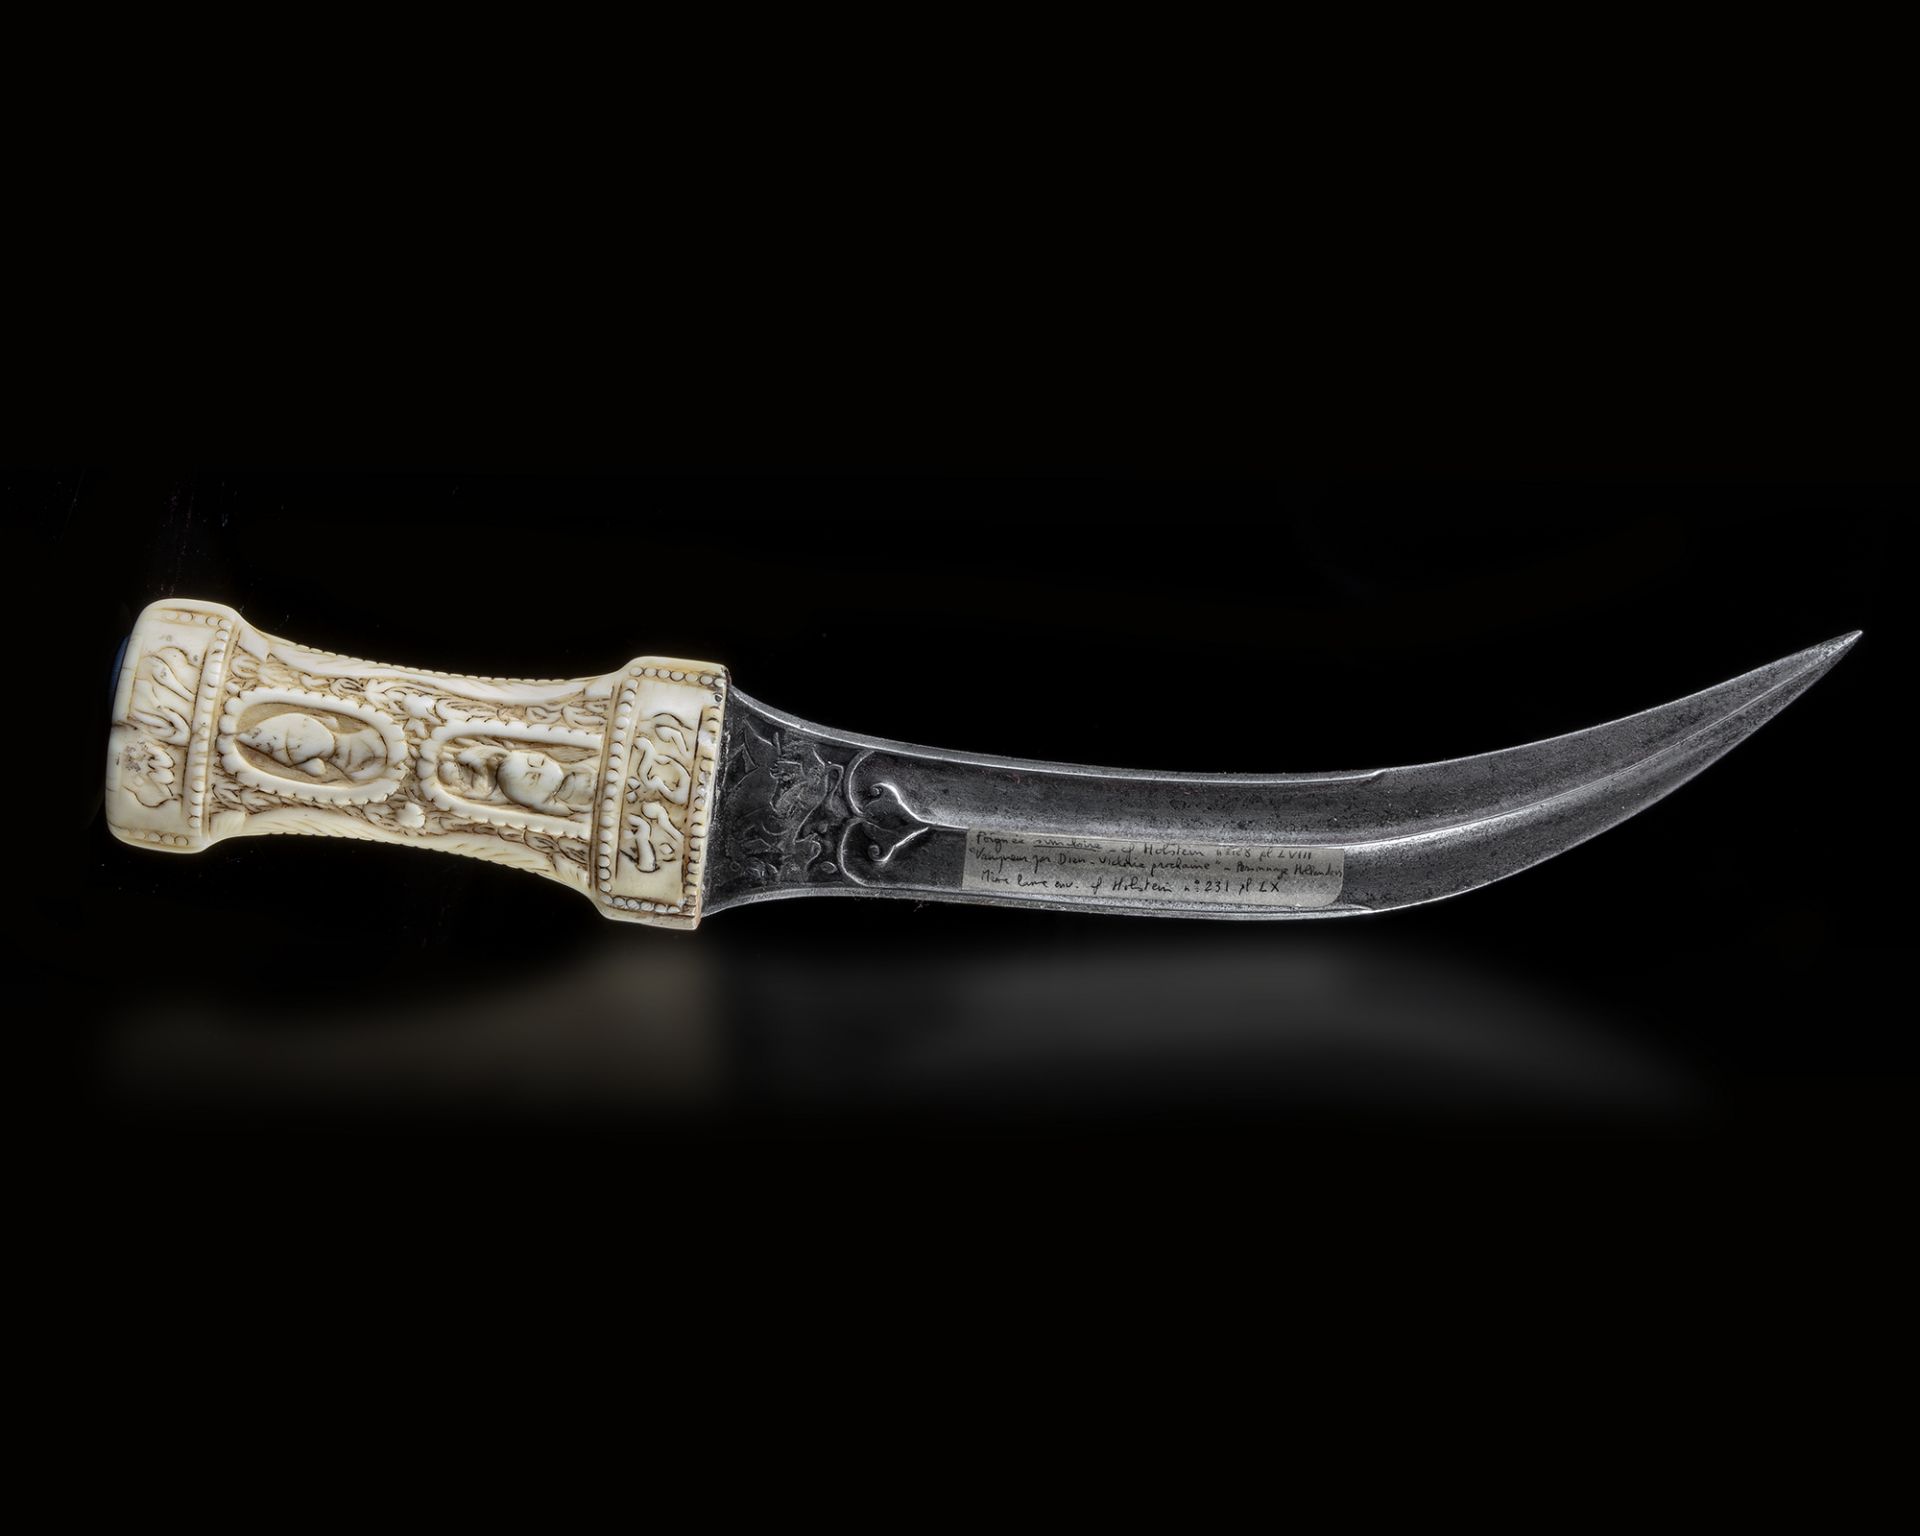 A QAJAR IVORY HILTED DAGGER, PERSIA 19TH CENTURY